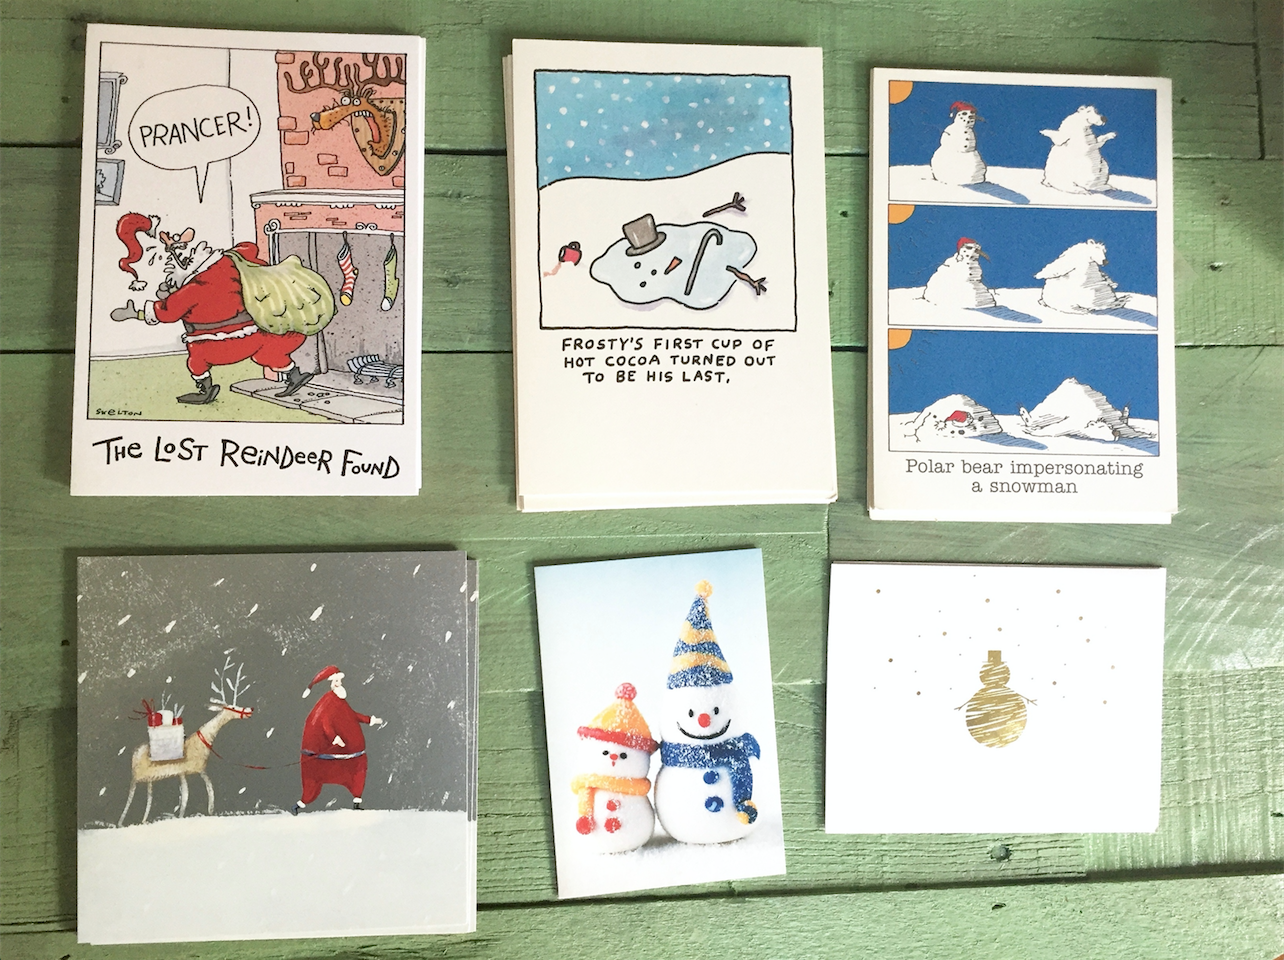 1 I’m glad I had so many holiday greeting cards that had not yet made it into a recycling bin MyFixitUpLife (1)